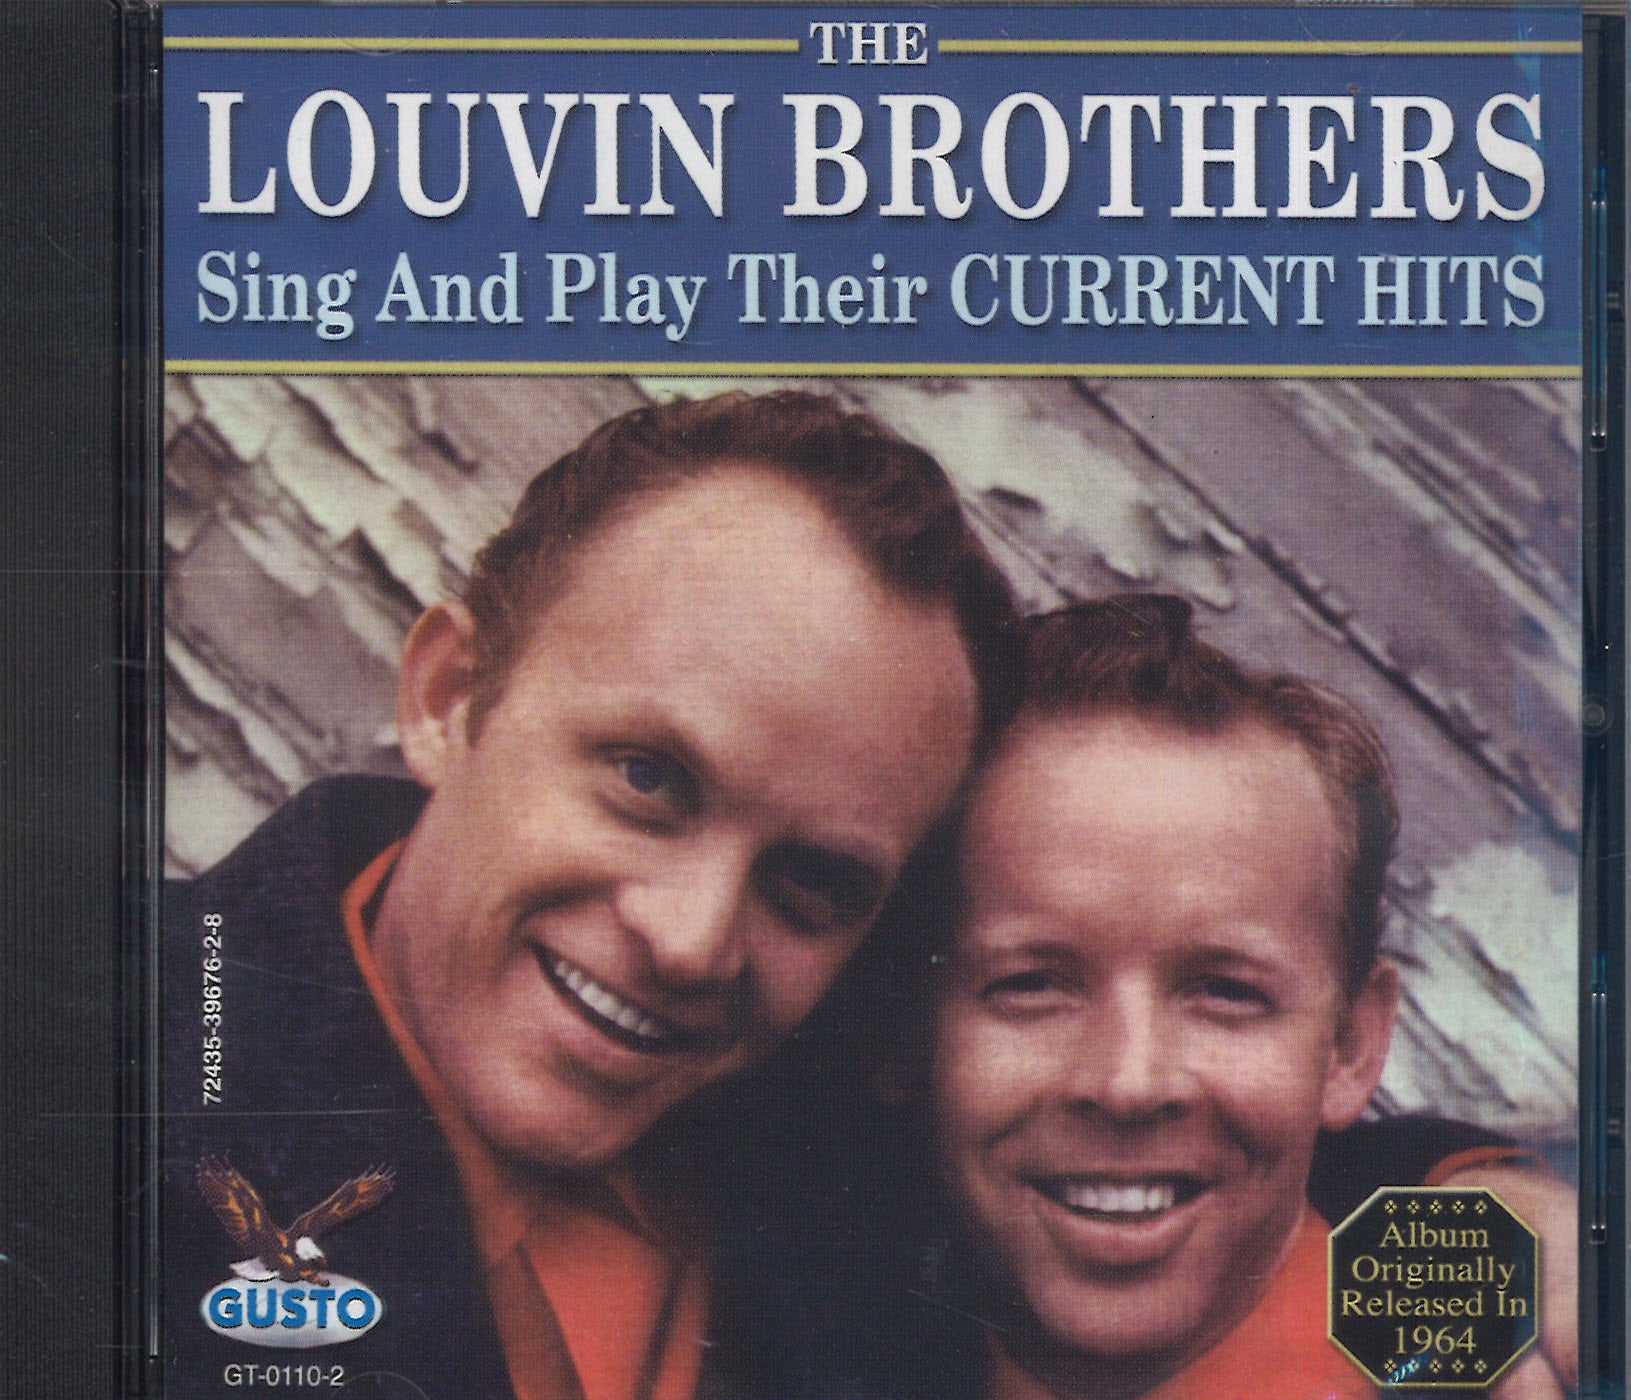 The Louvin Brothers Sing And Play Their Current Hits